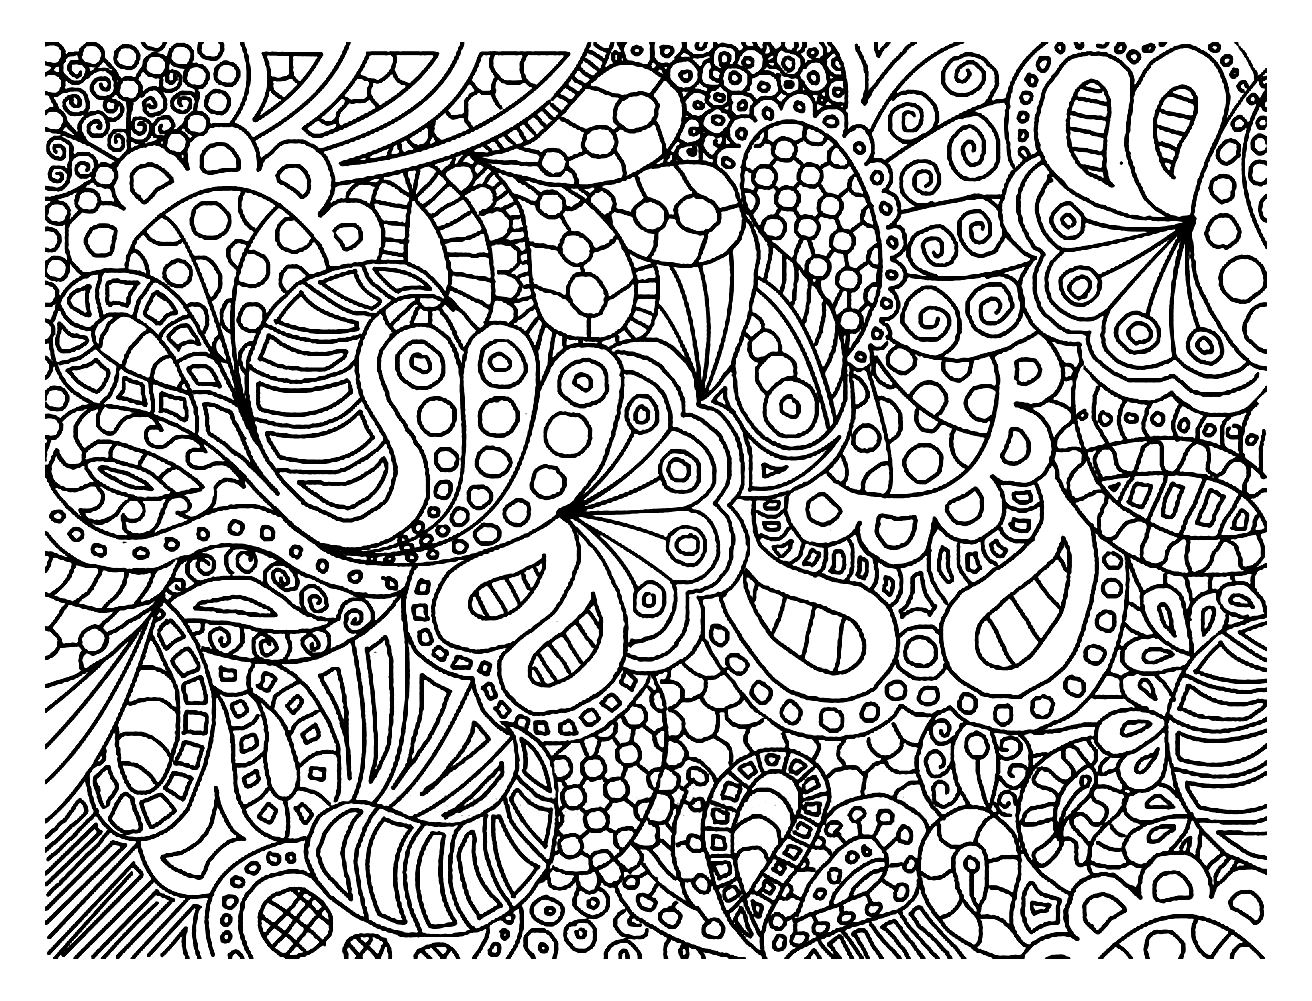 doodle-art-doodling-2-doodle-art-doodling-adult-coloring-pages